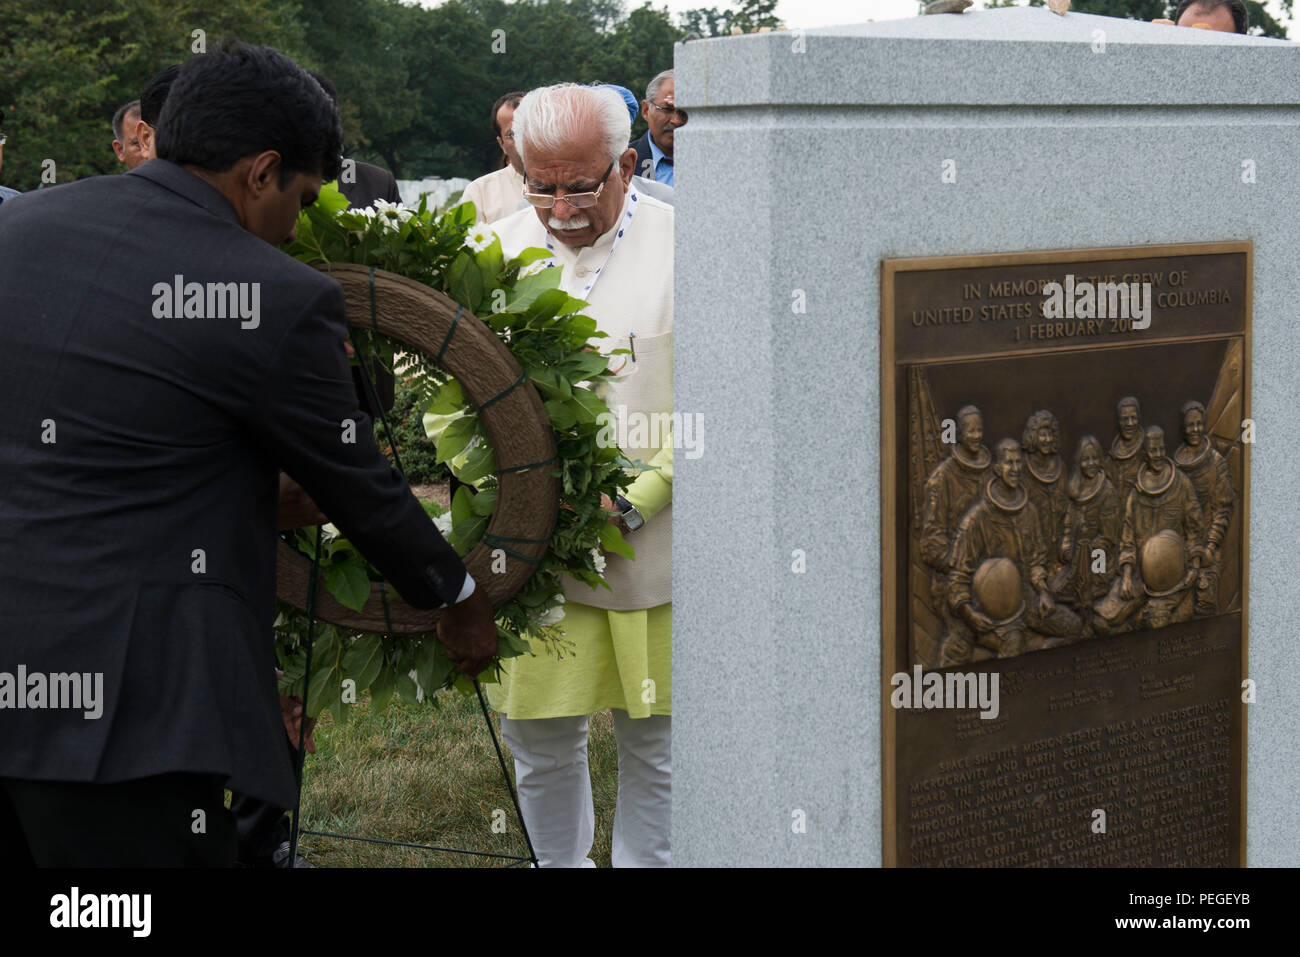 Chief Minister of Haryana, India Manohar Lal Khattar takes part in a wreath-laying ceremony at the Space Shuttle Columbia Memorial near the Memorial Amphitheater in Arlington National Cemetery, Aug. 18, 2015, in Arlington, Va. Kalpana Chawla, one of seven crew members killed during the Columbia disaster, was born in Karnal, India and was posthumously awarded the Congressional Space Medal of Honor, the NASA Space Flight Medal, and the NASA Distinguished Service Medal. (U.S. Army photo by Rachel Larue/released) Stock Photo